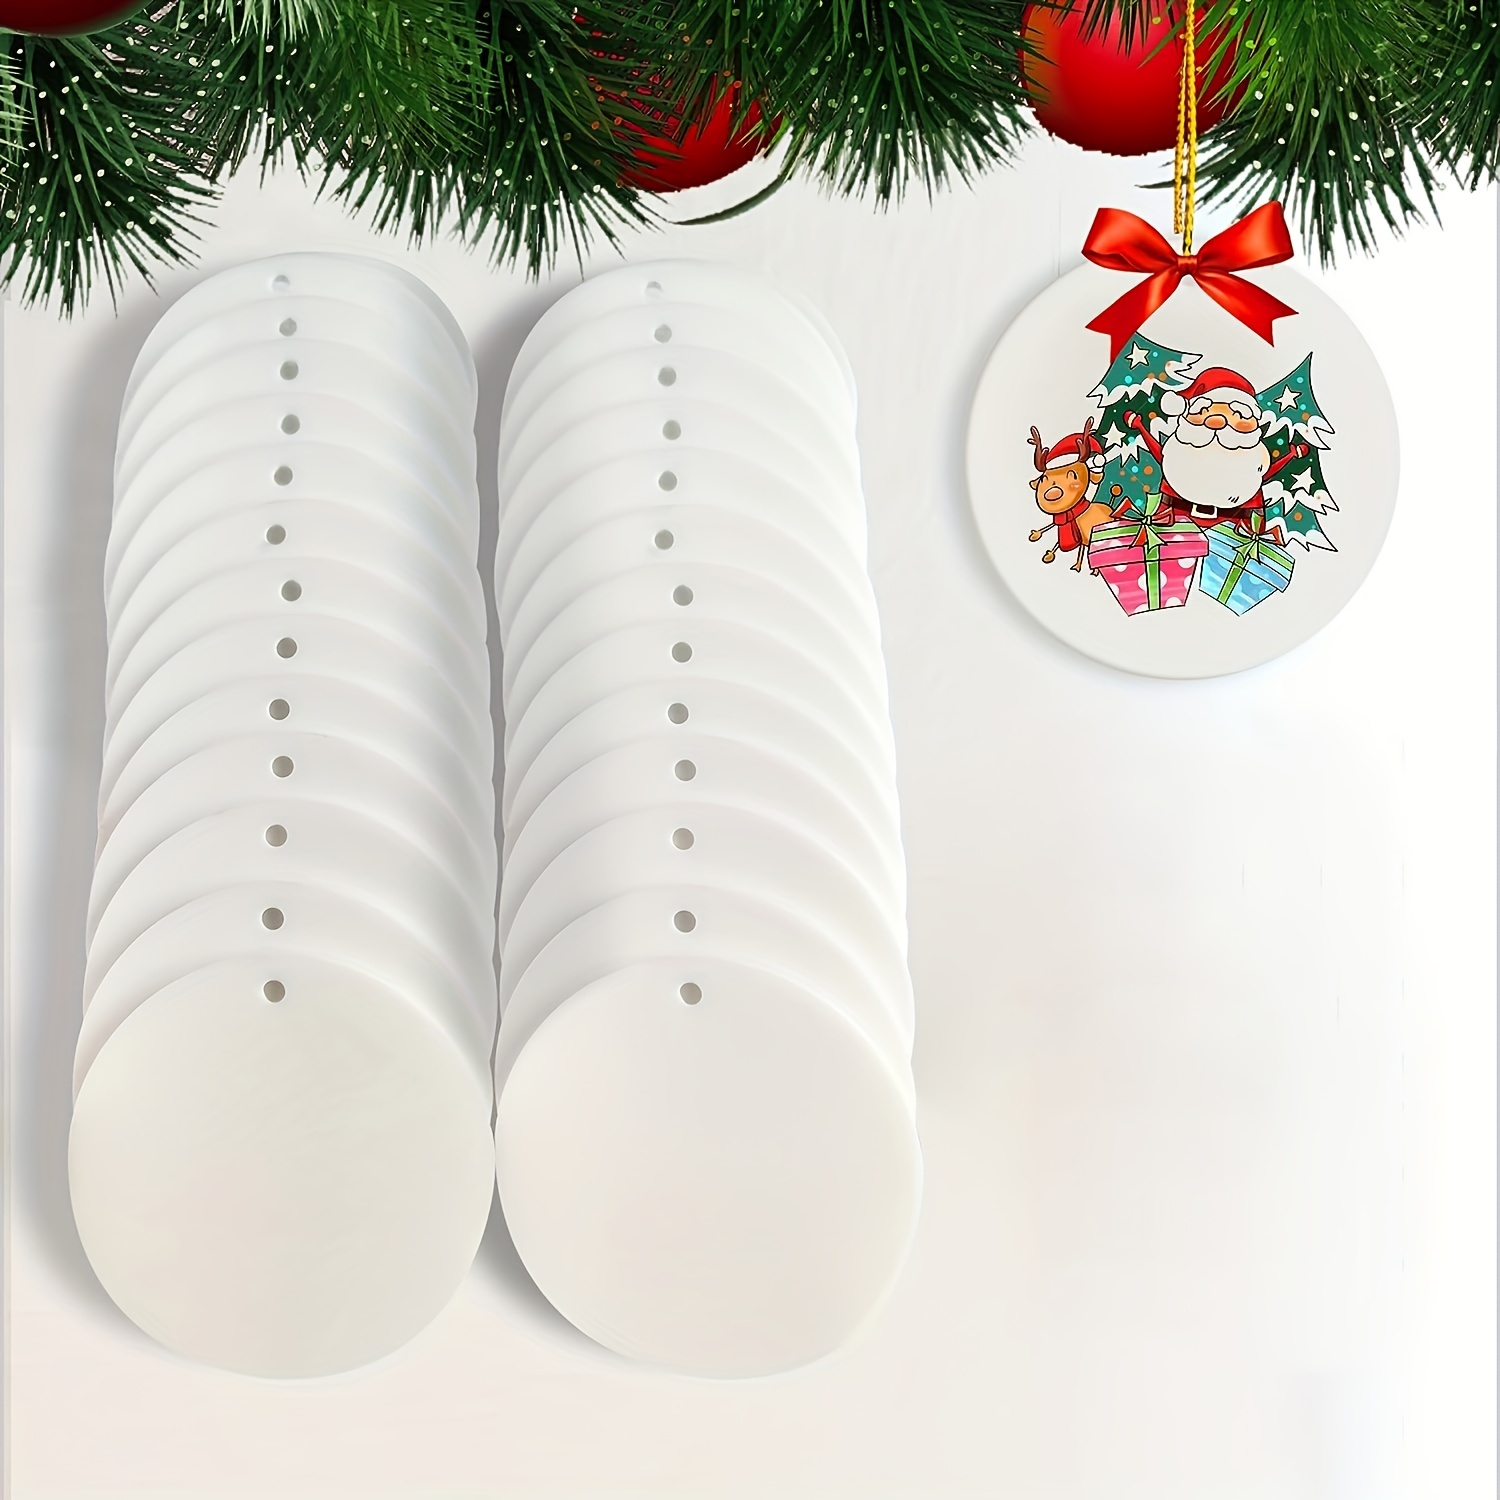 Sublimation Ornament Blanks, 3 White Ceramic Ornaments DIY Valentines Day  Decorations Room Decor Craft Supplies as Wedding Gifts (25pcs)